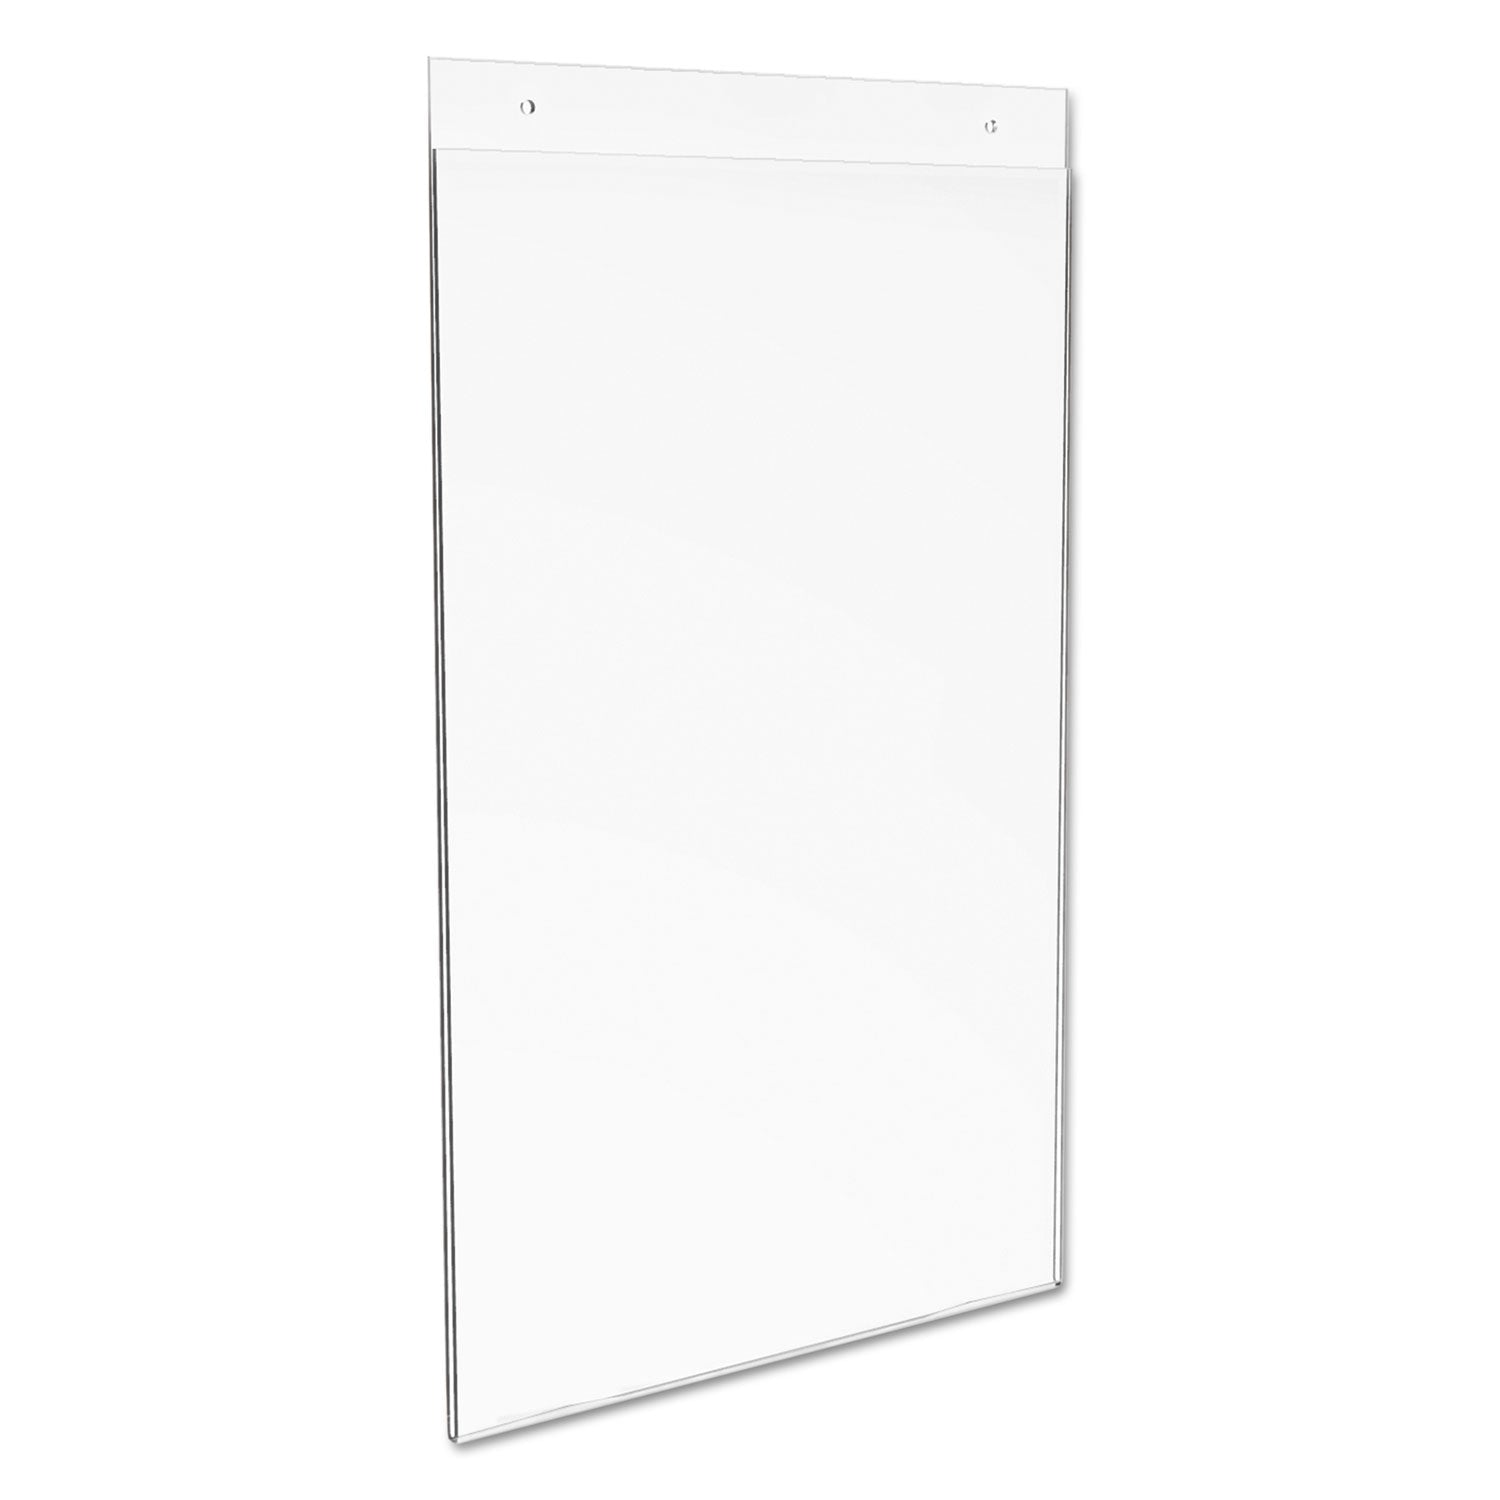 classic-image-single-sided-wall-sign-holder-plastic-11-x-17-insert-clear_def68001 - 7